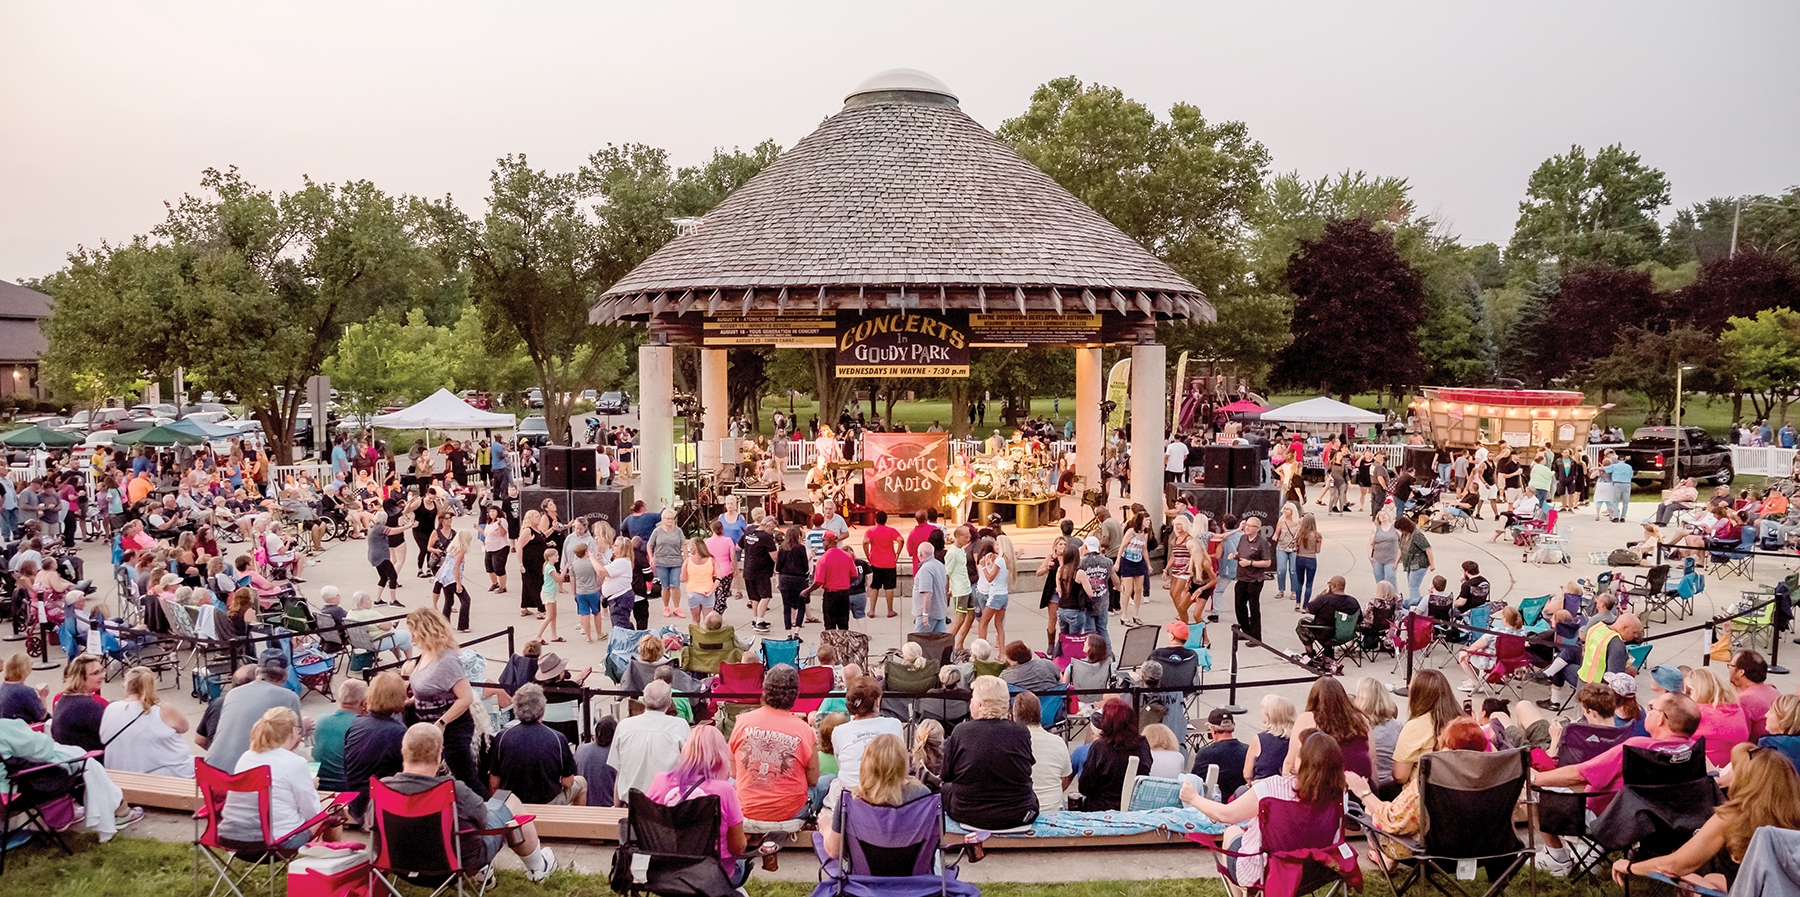 The Wayne Dispatch » Concerts in the park return!